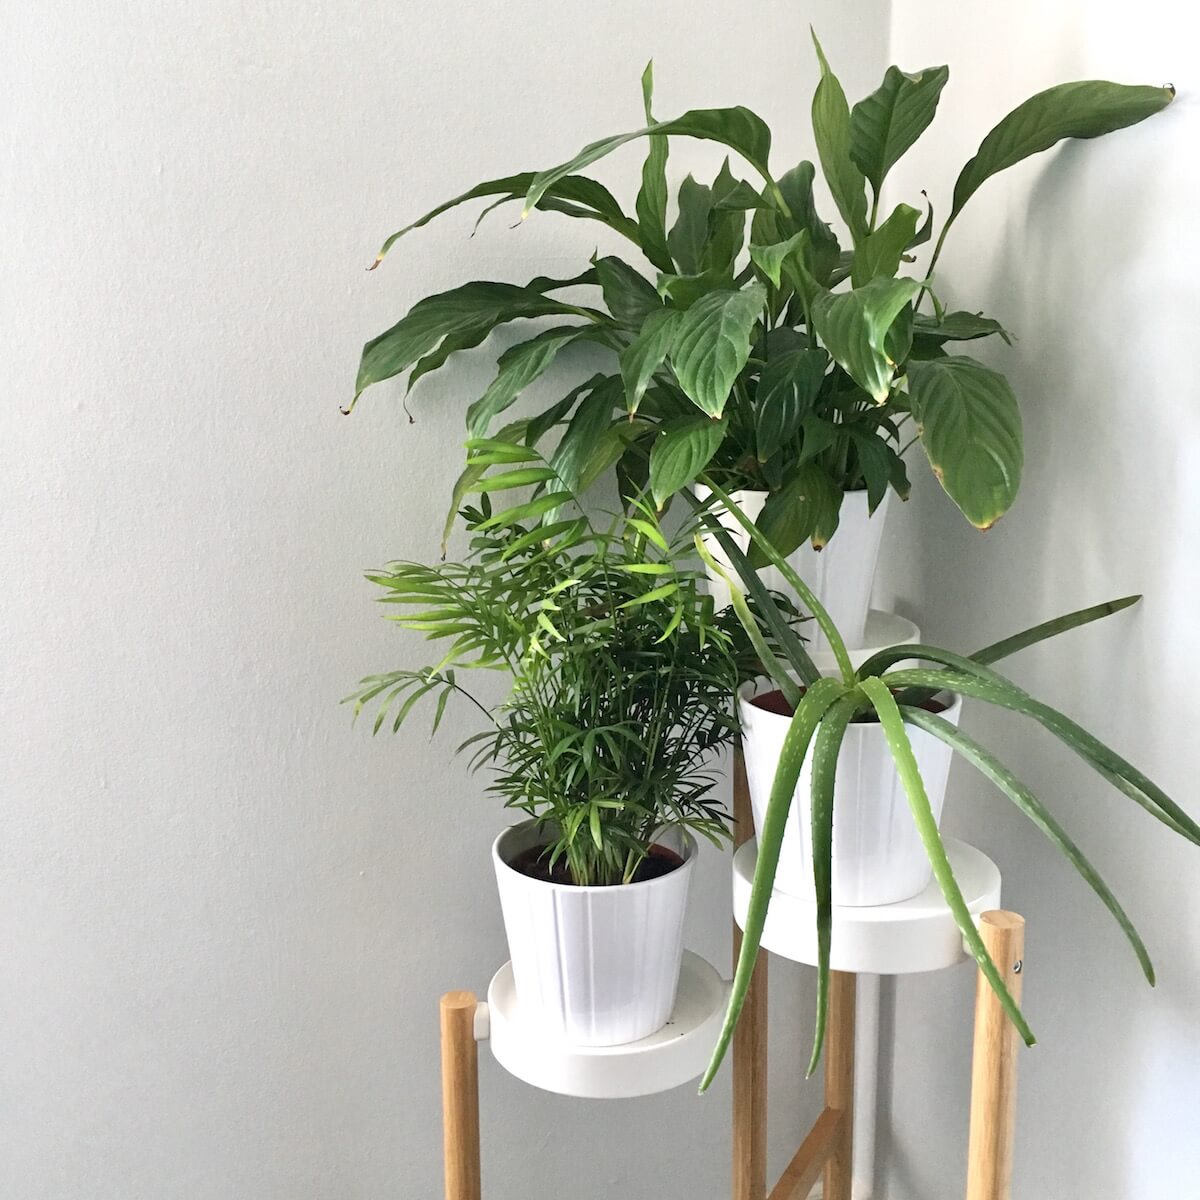 Minimalist Style with Planters From Ikea - Welcome Objects